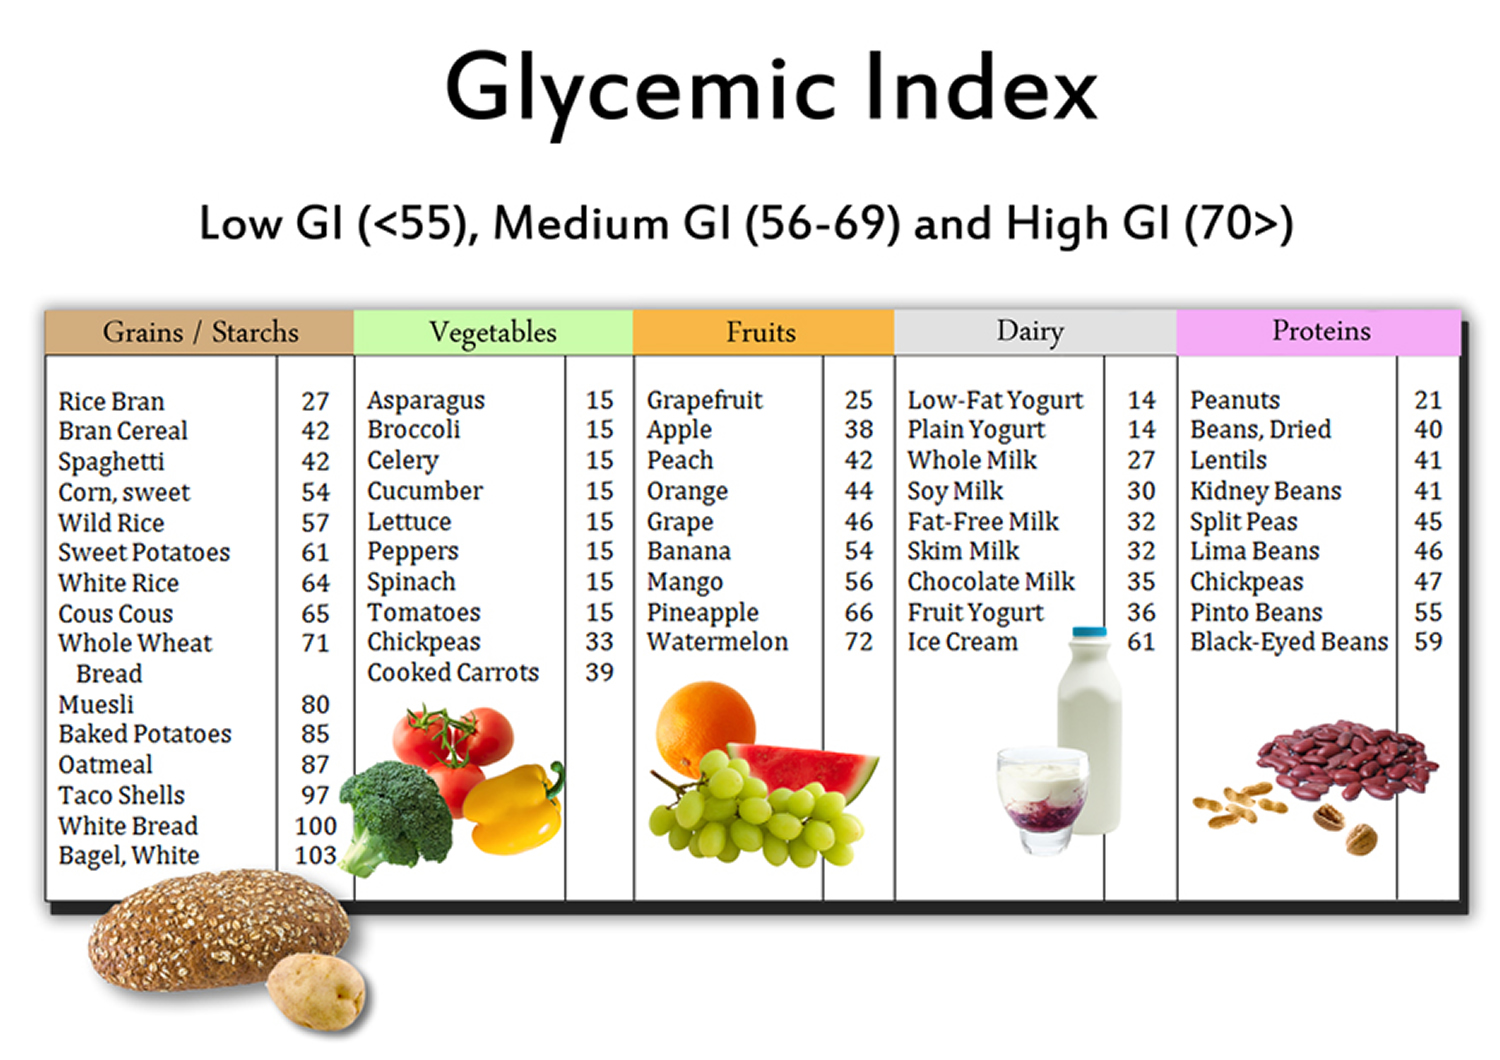 the glycemic index of various foods.